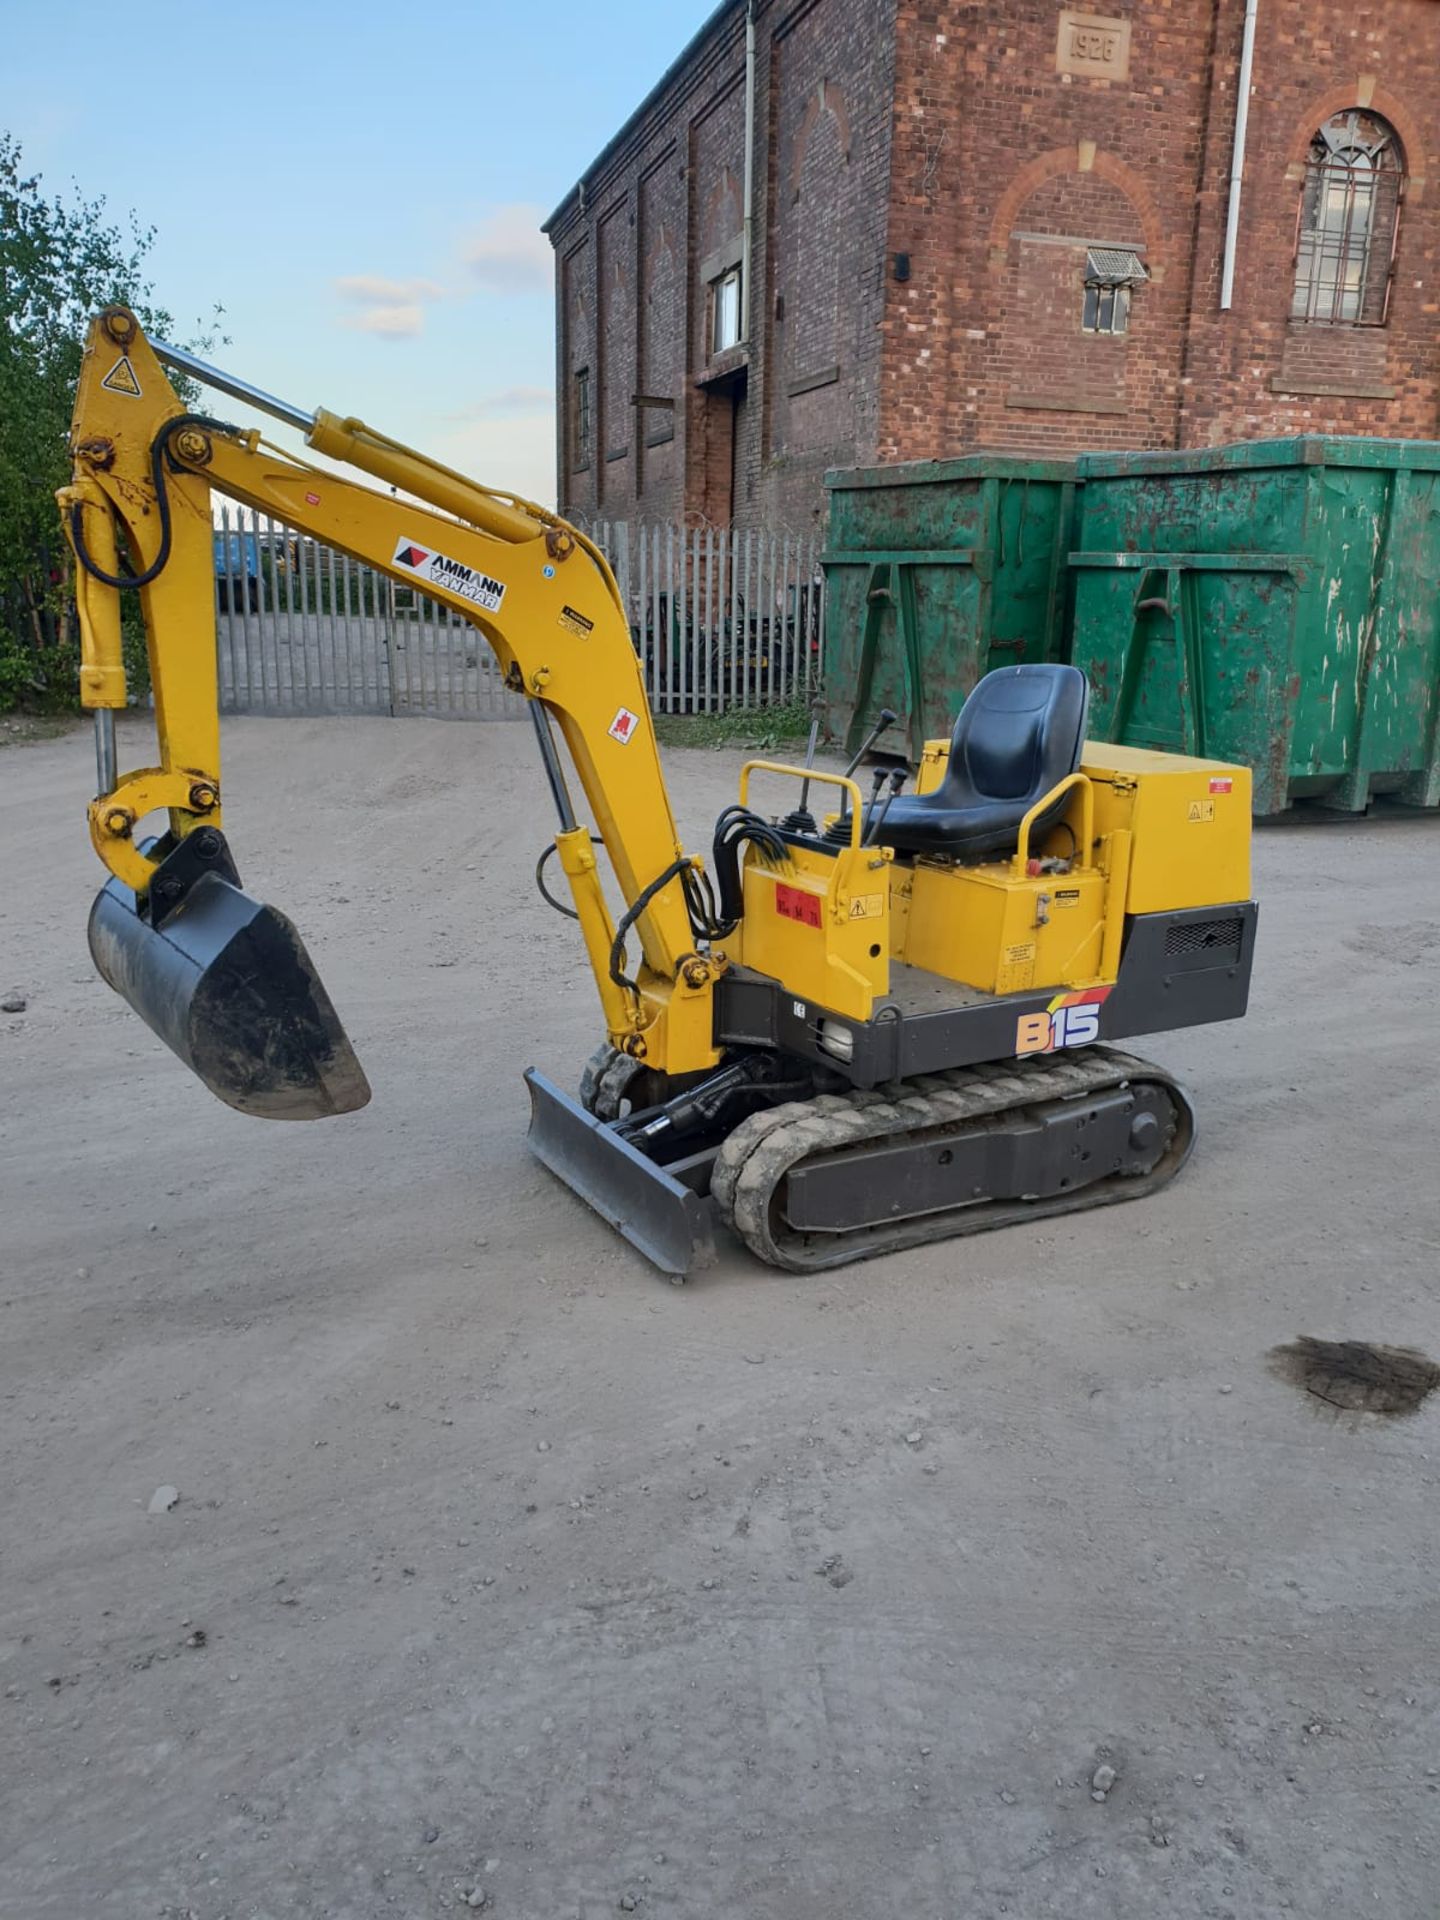 YANMAR B15 1.5 MINI DIGGER FULL WORKING ORDER, RECENTLY PAINTED WITH STICKERS, TRACKS 60% *NO VAT* - Image 2 of 8